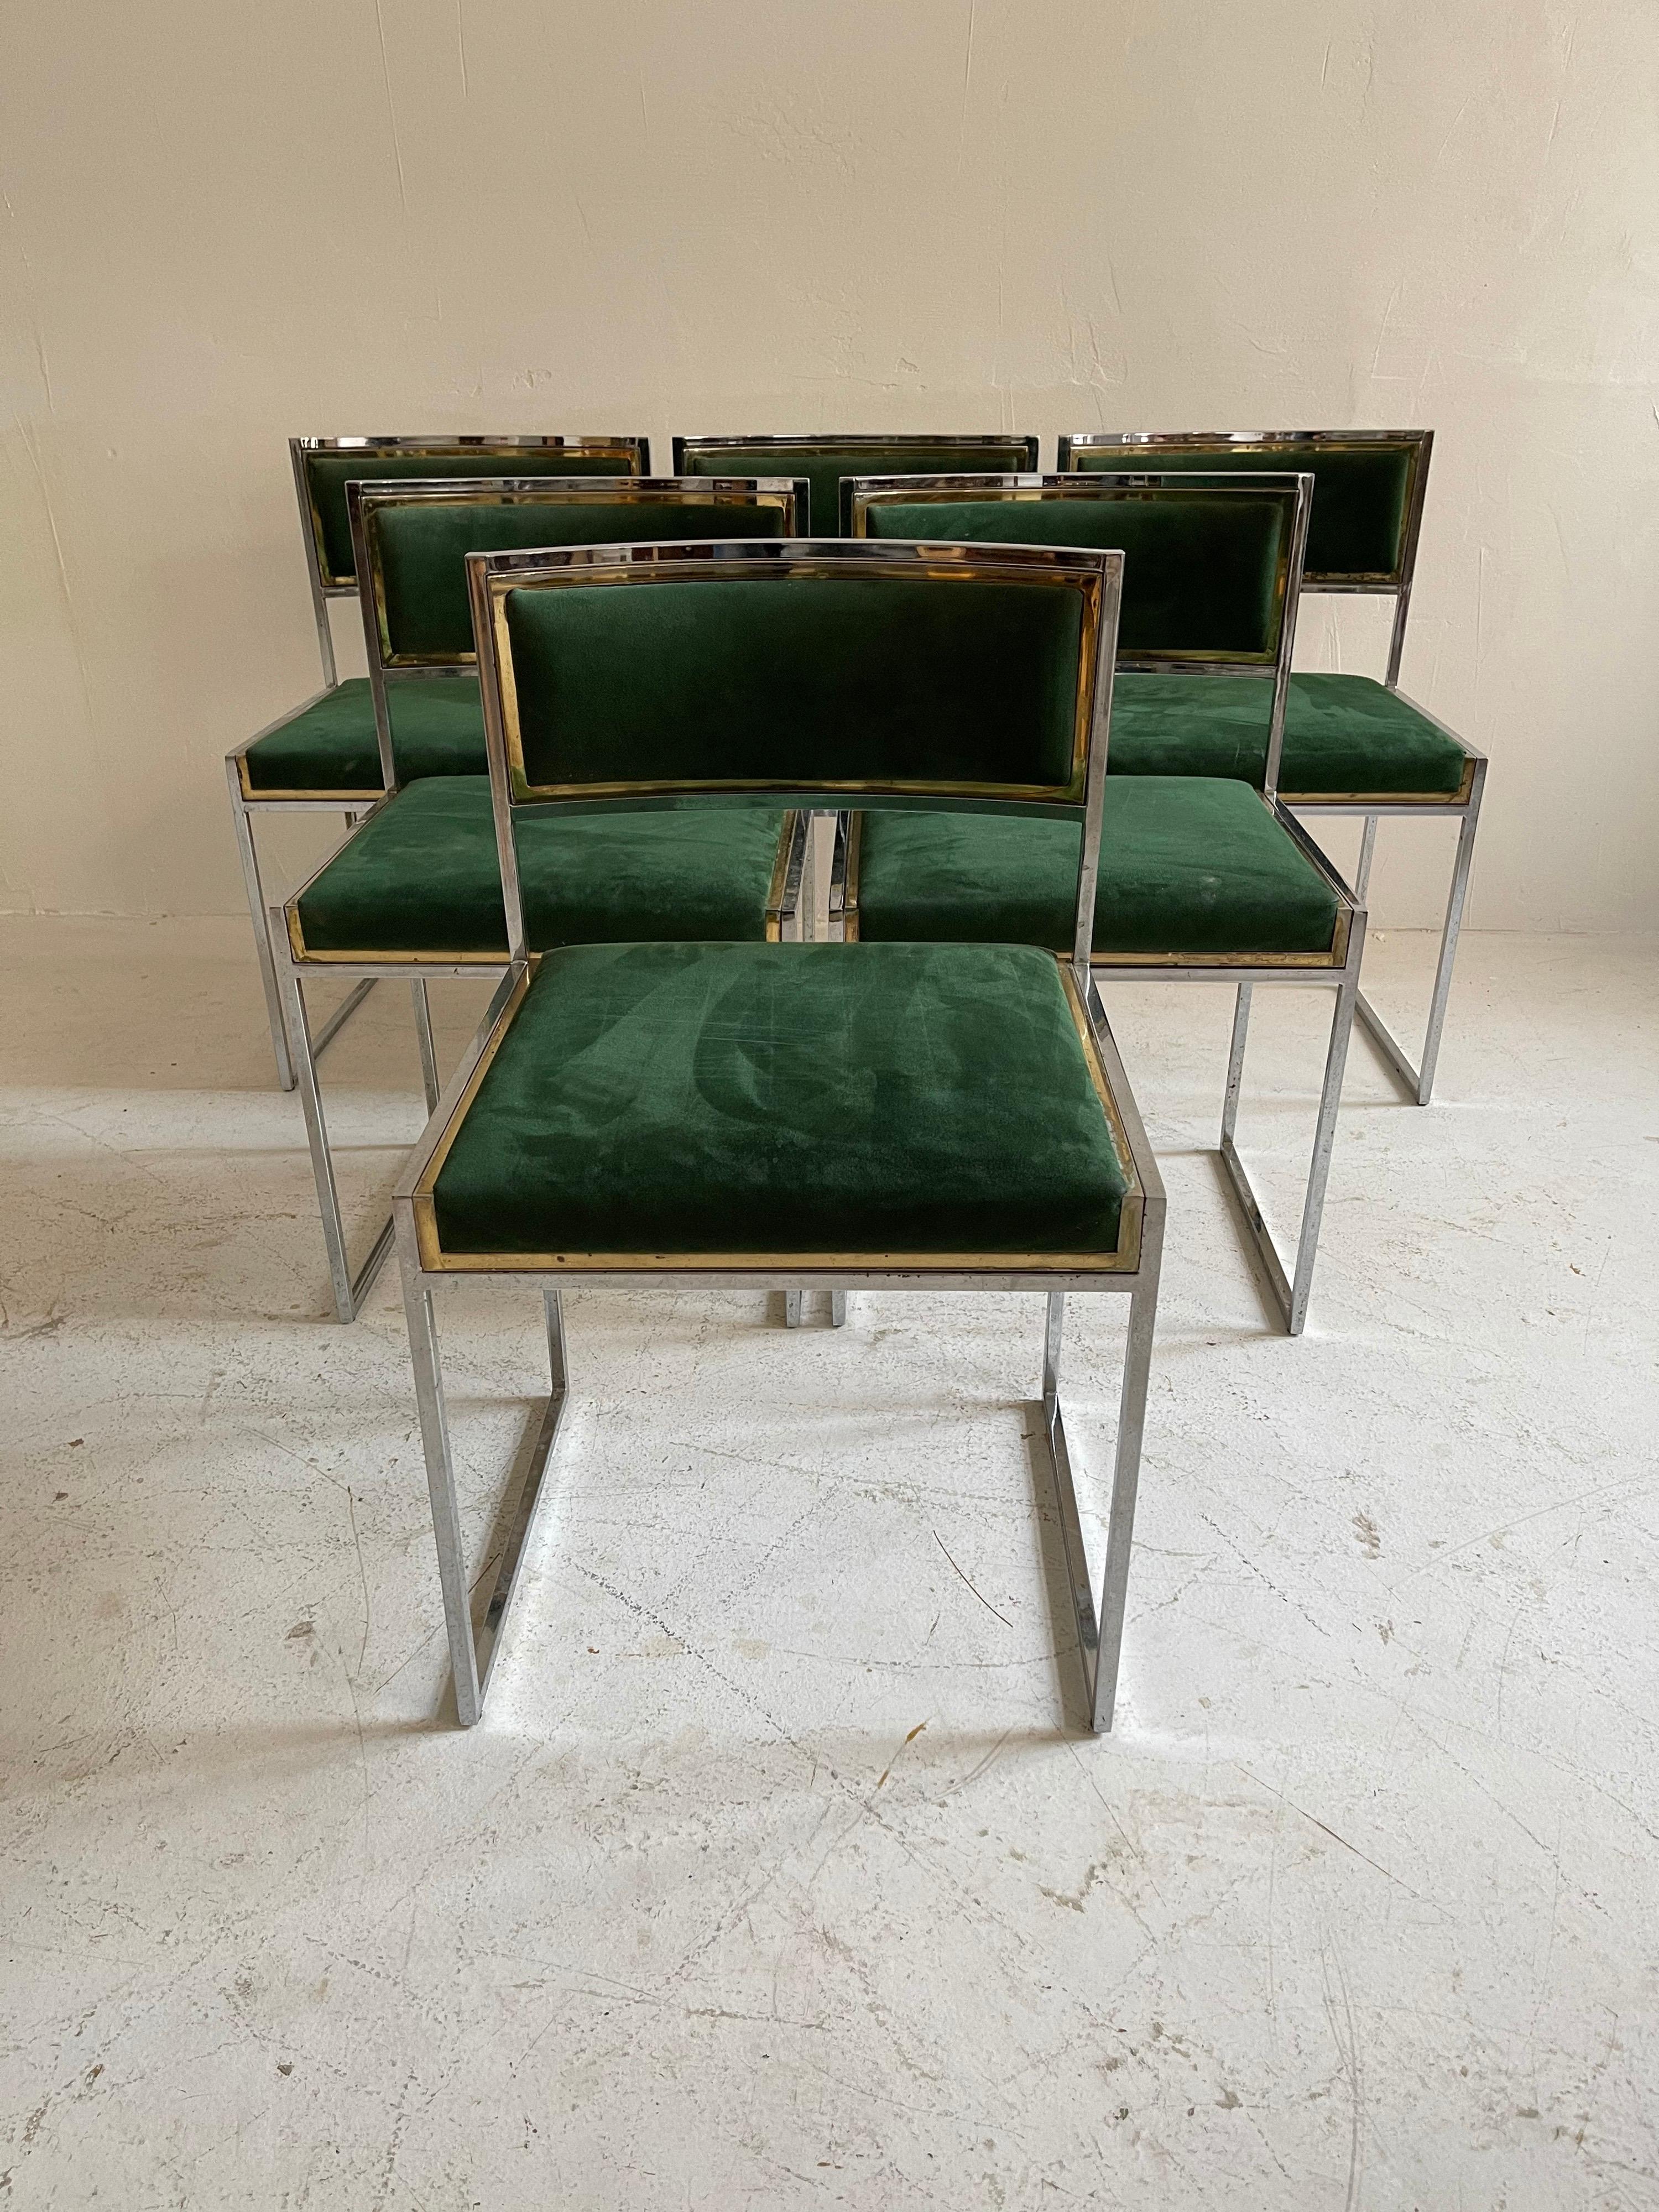 Willy Rizzo patinated green suede leather brass chrome dining chairs, Italy, 1970s.